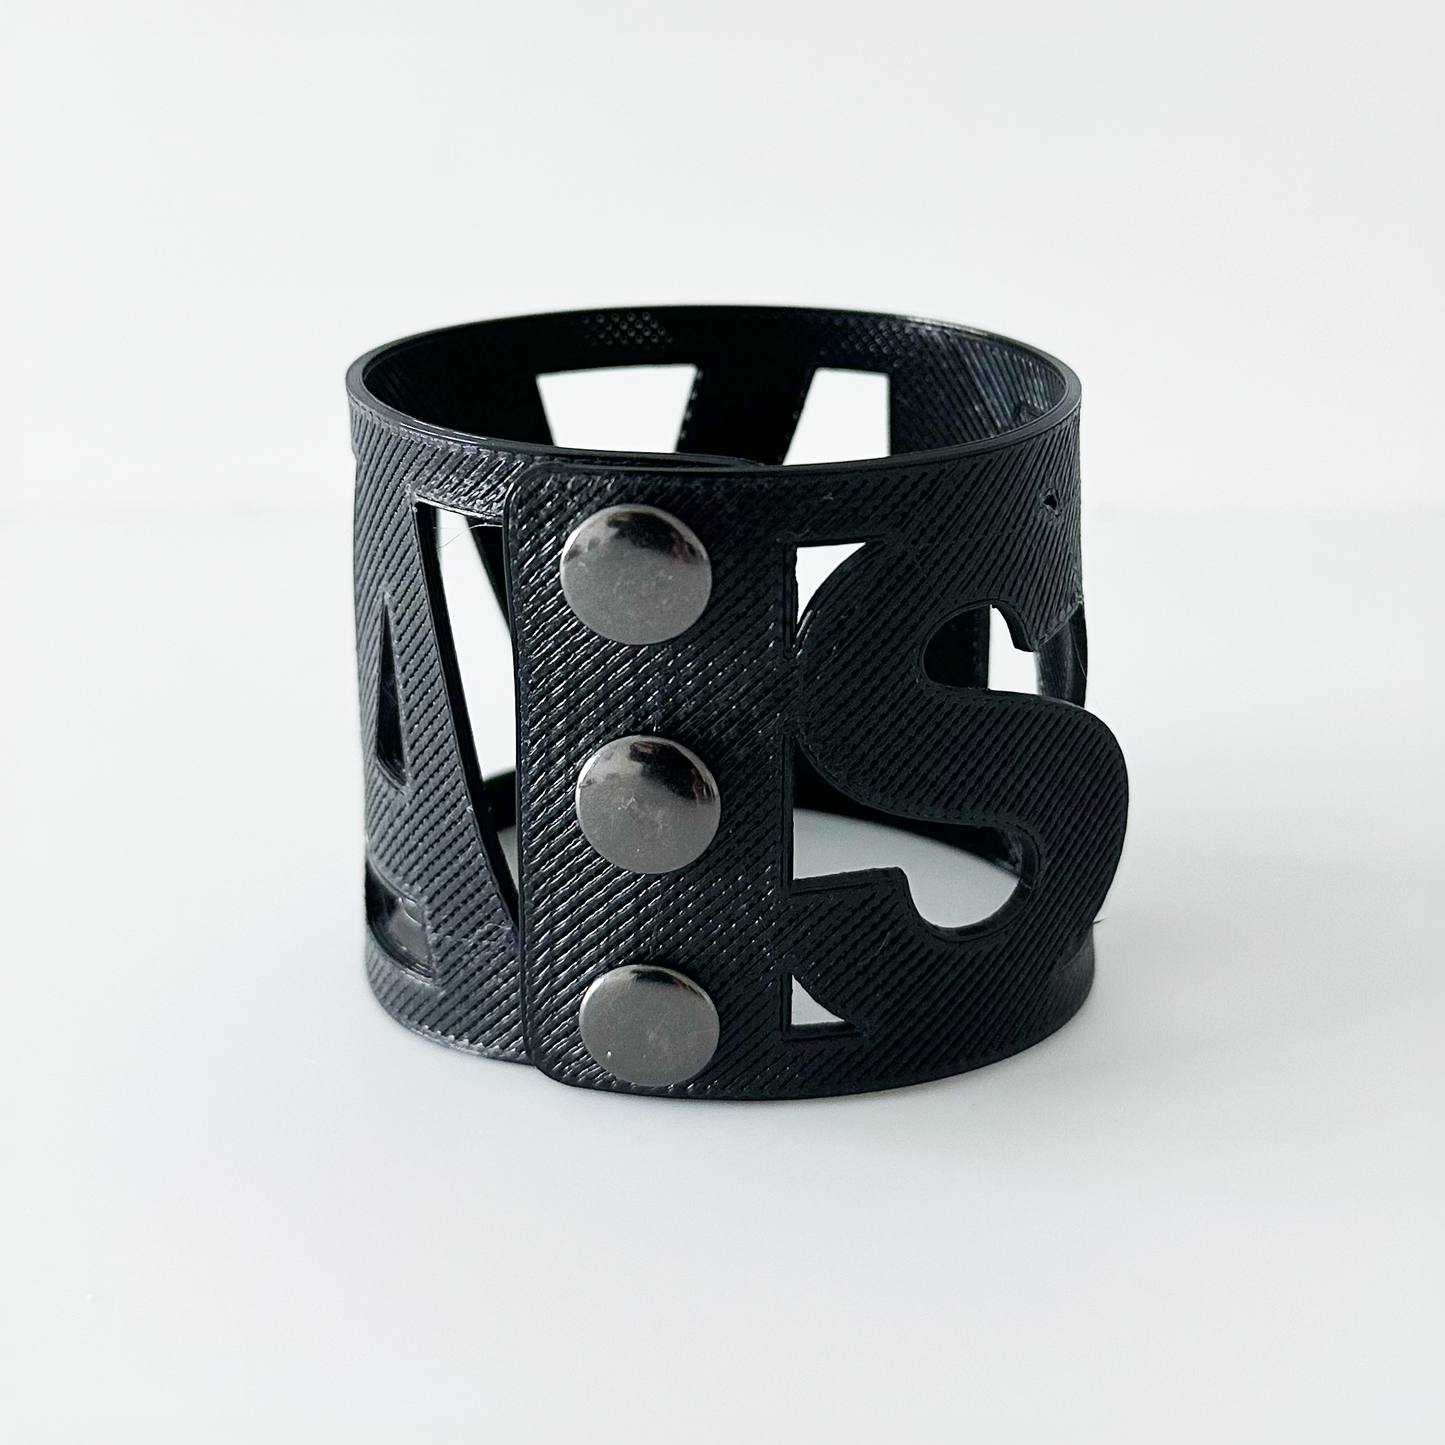 Custom 3D printed name or monogram cuff bracelet in black with 3 silver snaps.